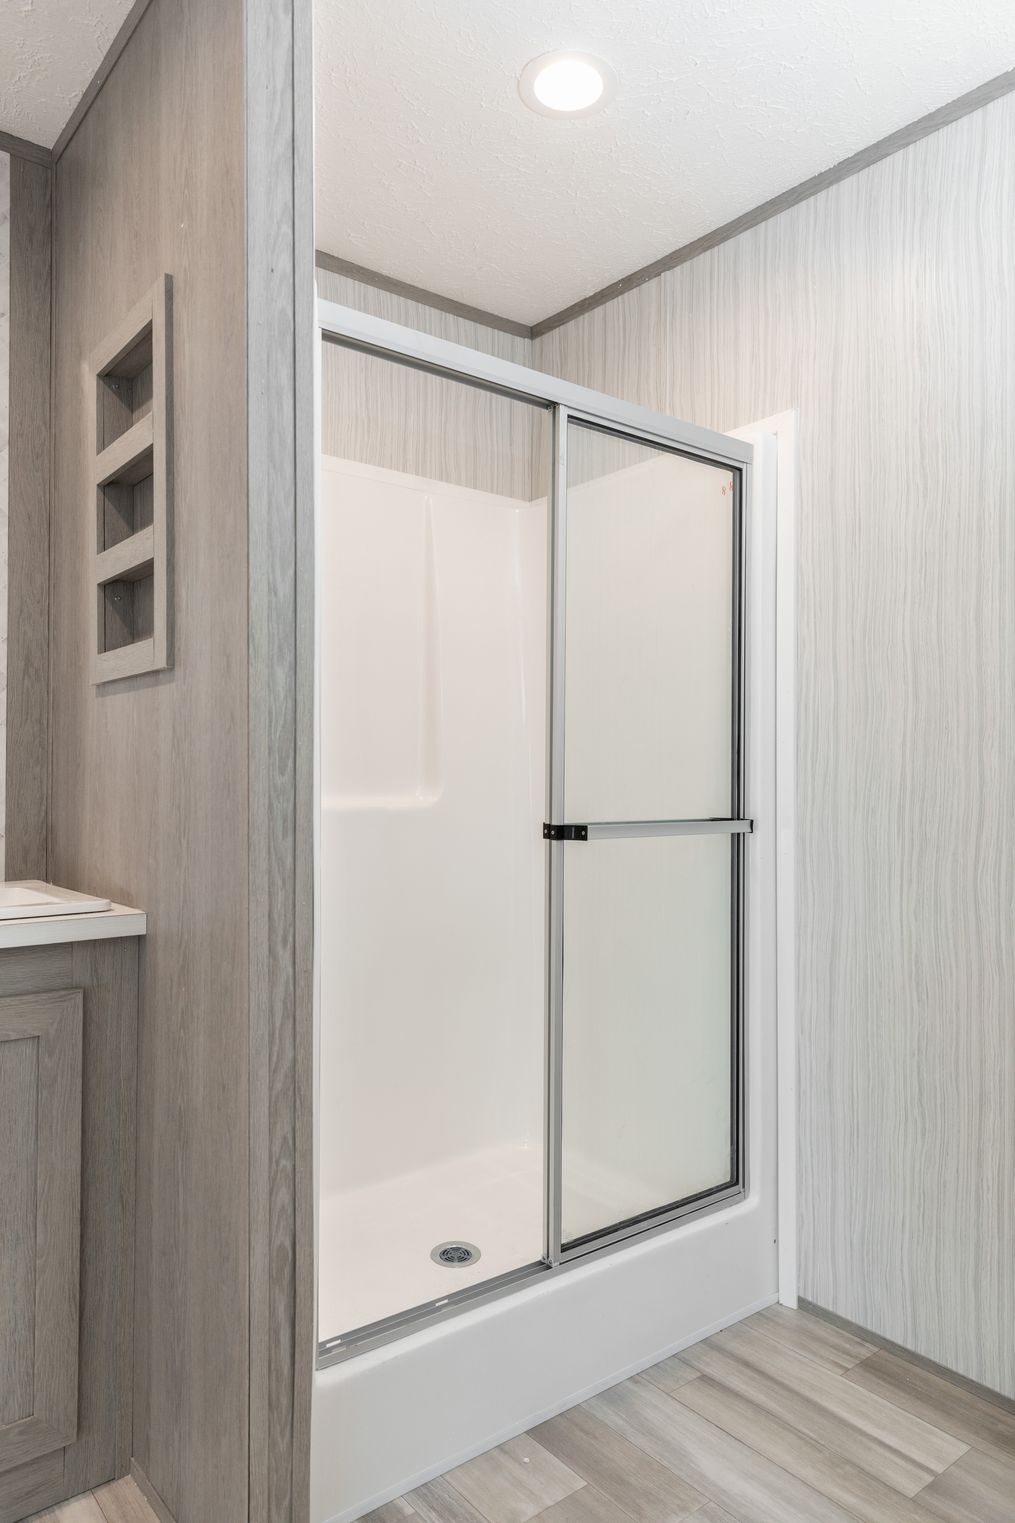 The BLAZER 66 F Primary Bathroom. This Manufactured Mobile Home features 3 bedrooms and 2 baths.